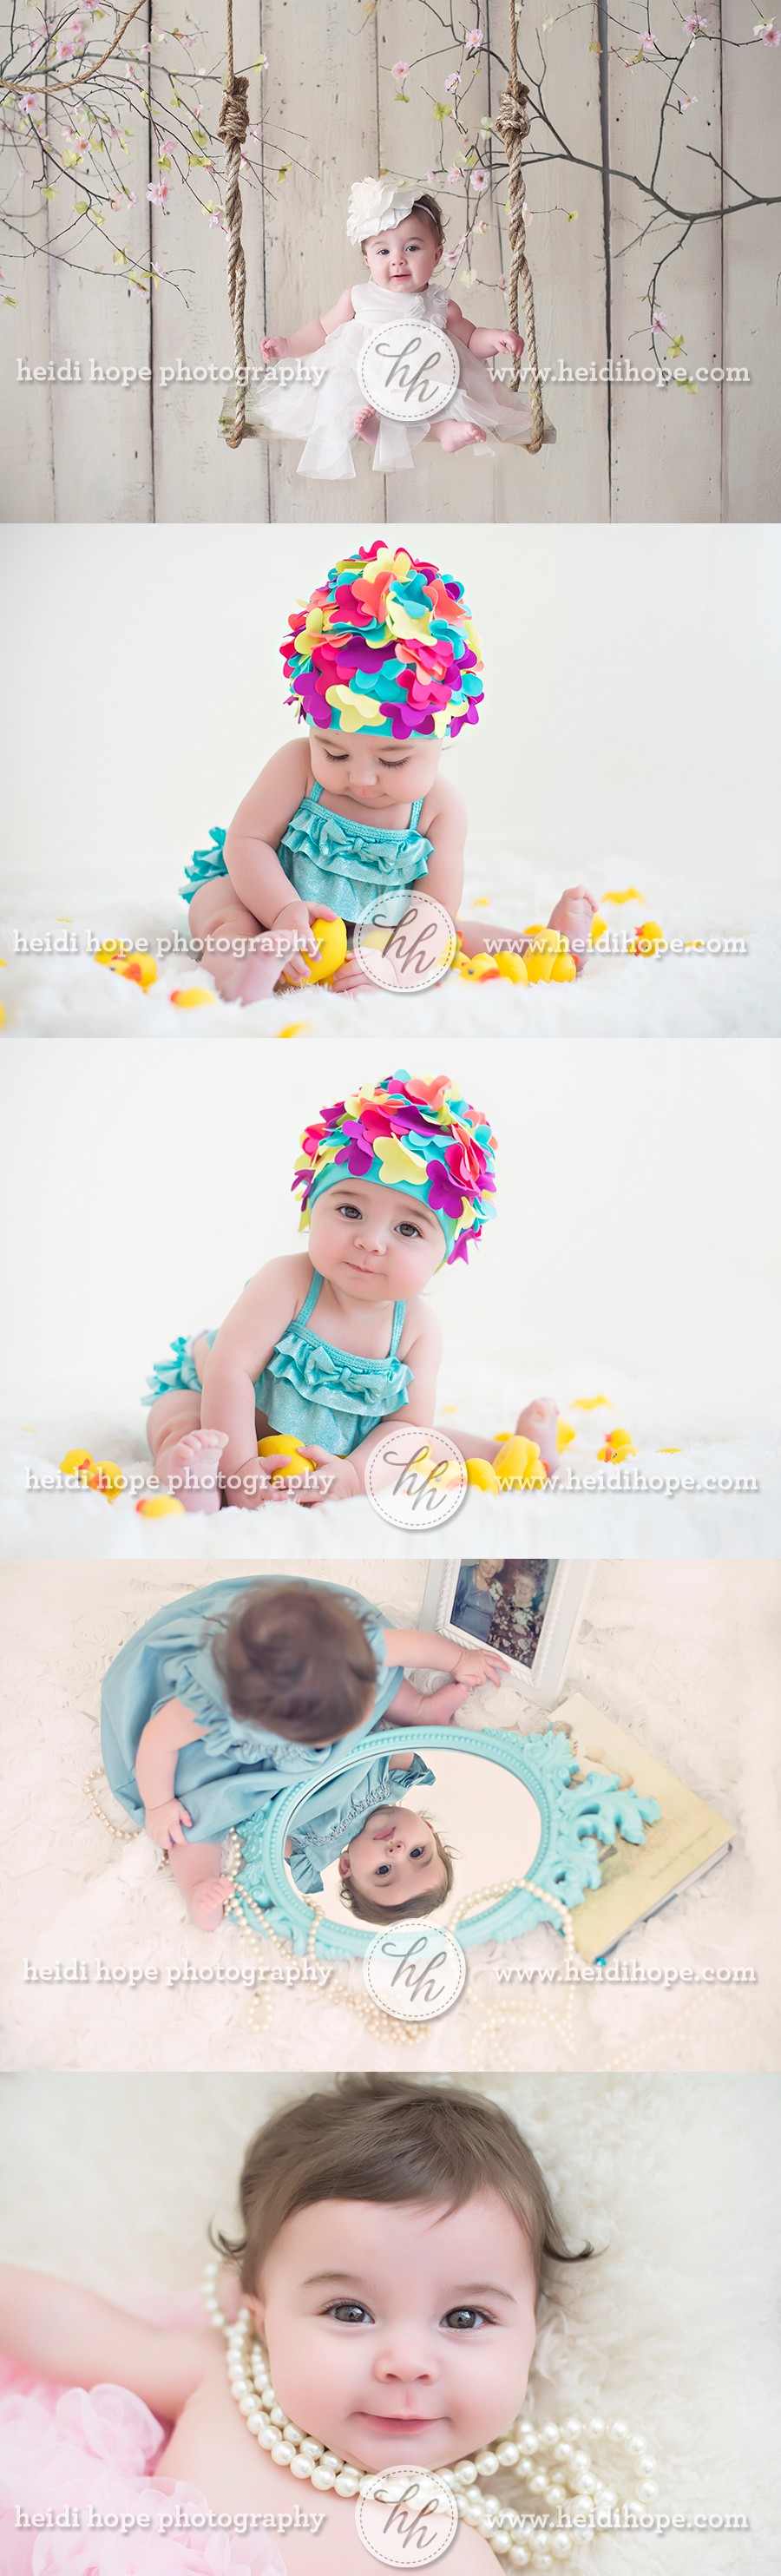 6 month old baby girl portraits